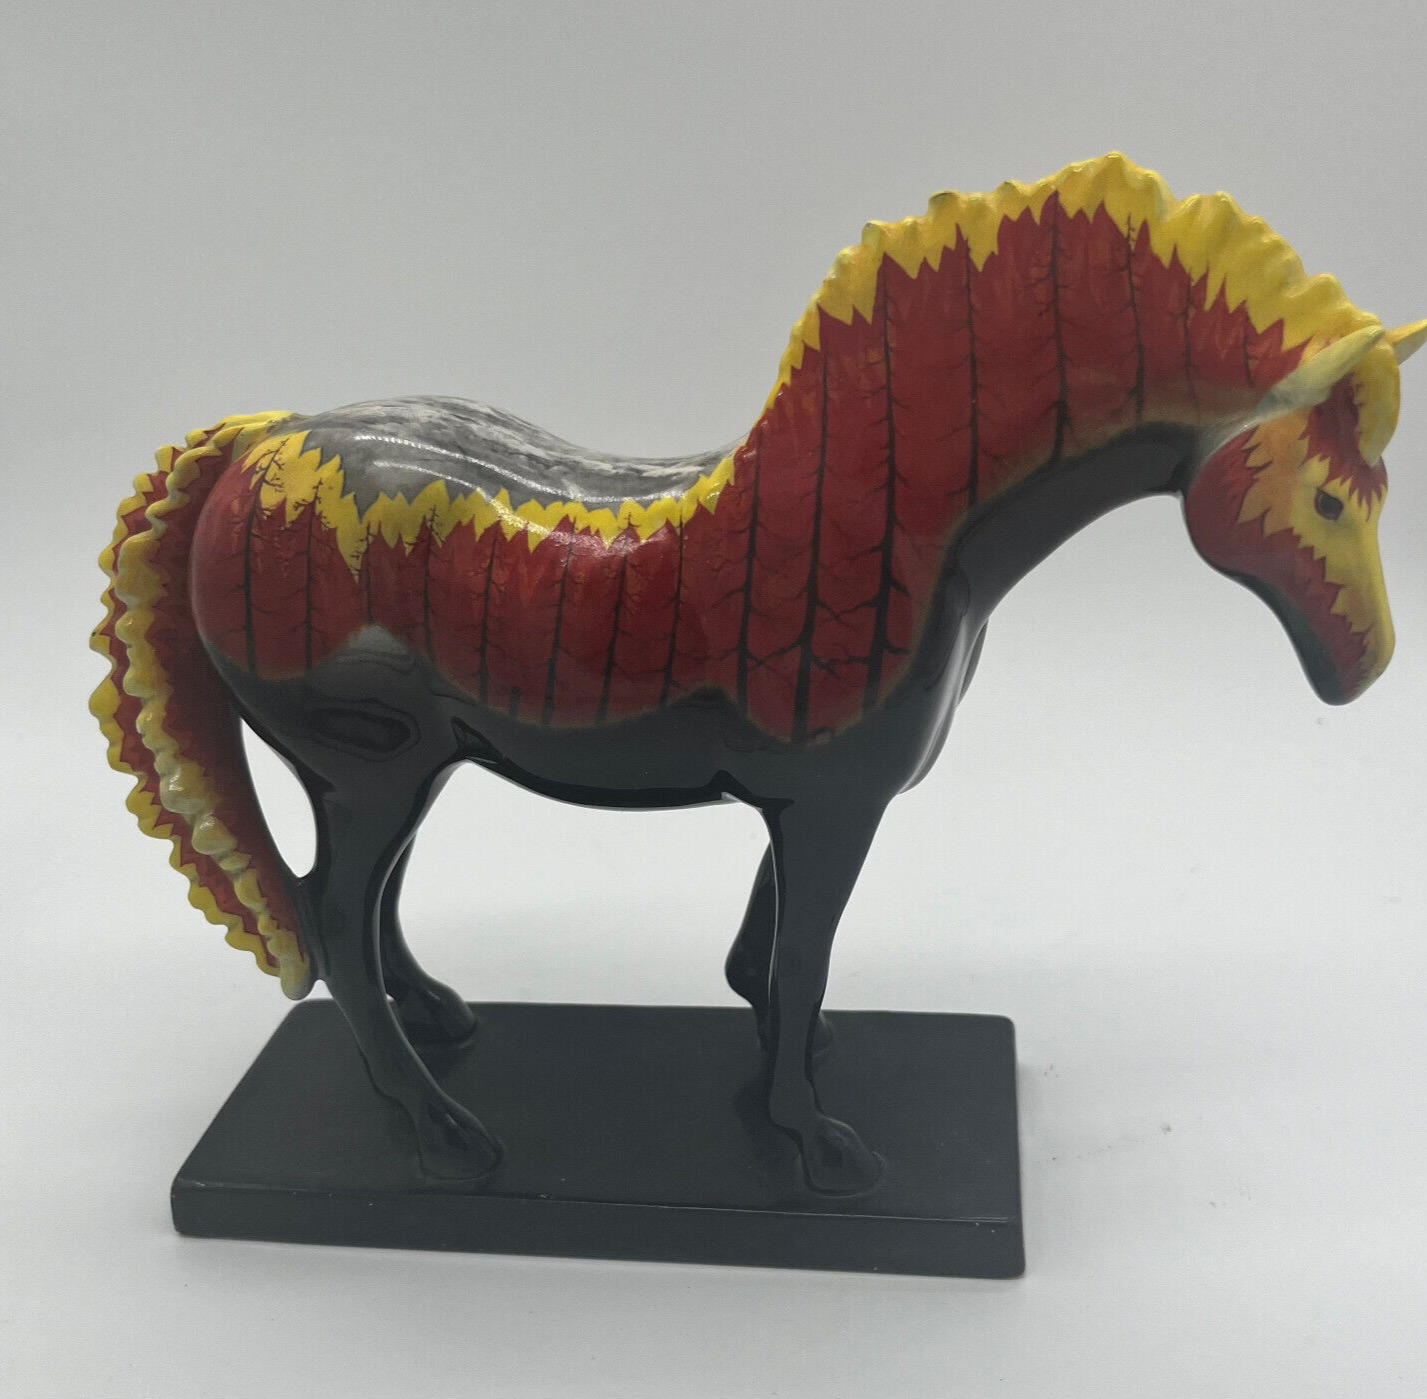 2003 Westland Trail of Painted Ponies Wildfire Figurine E1/7082 1458 1st Edition